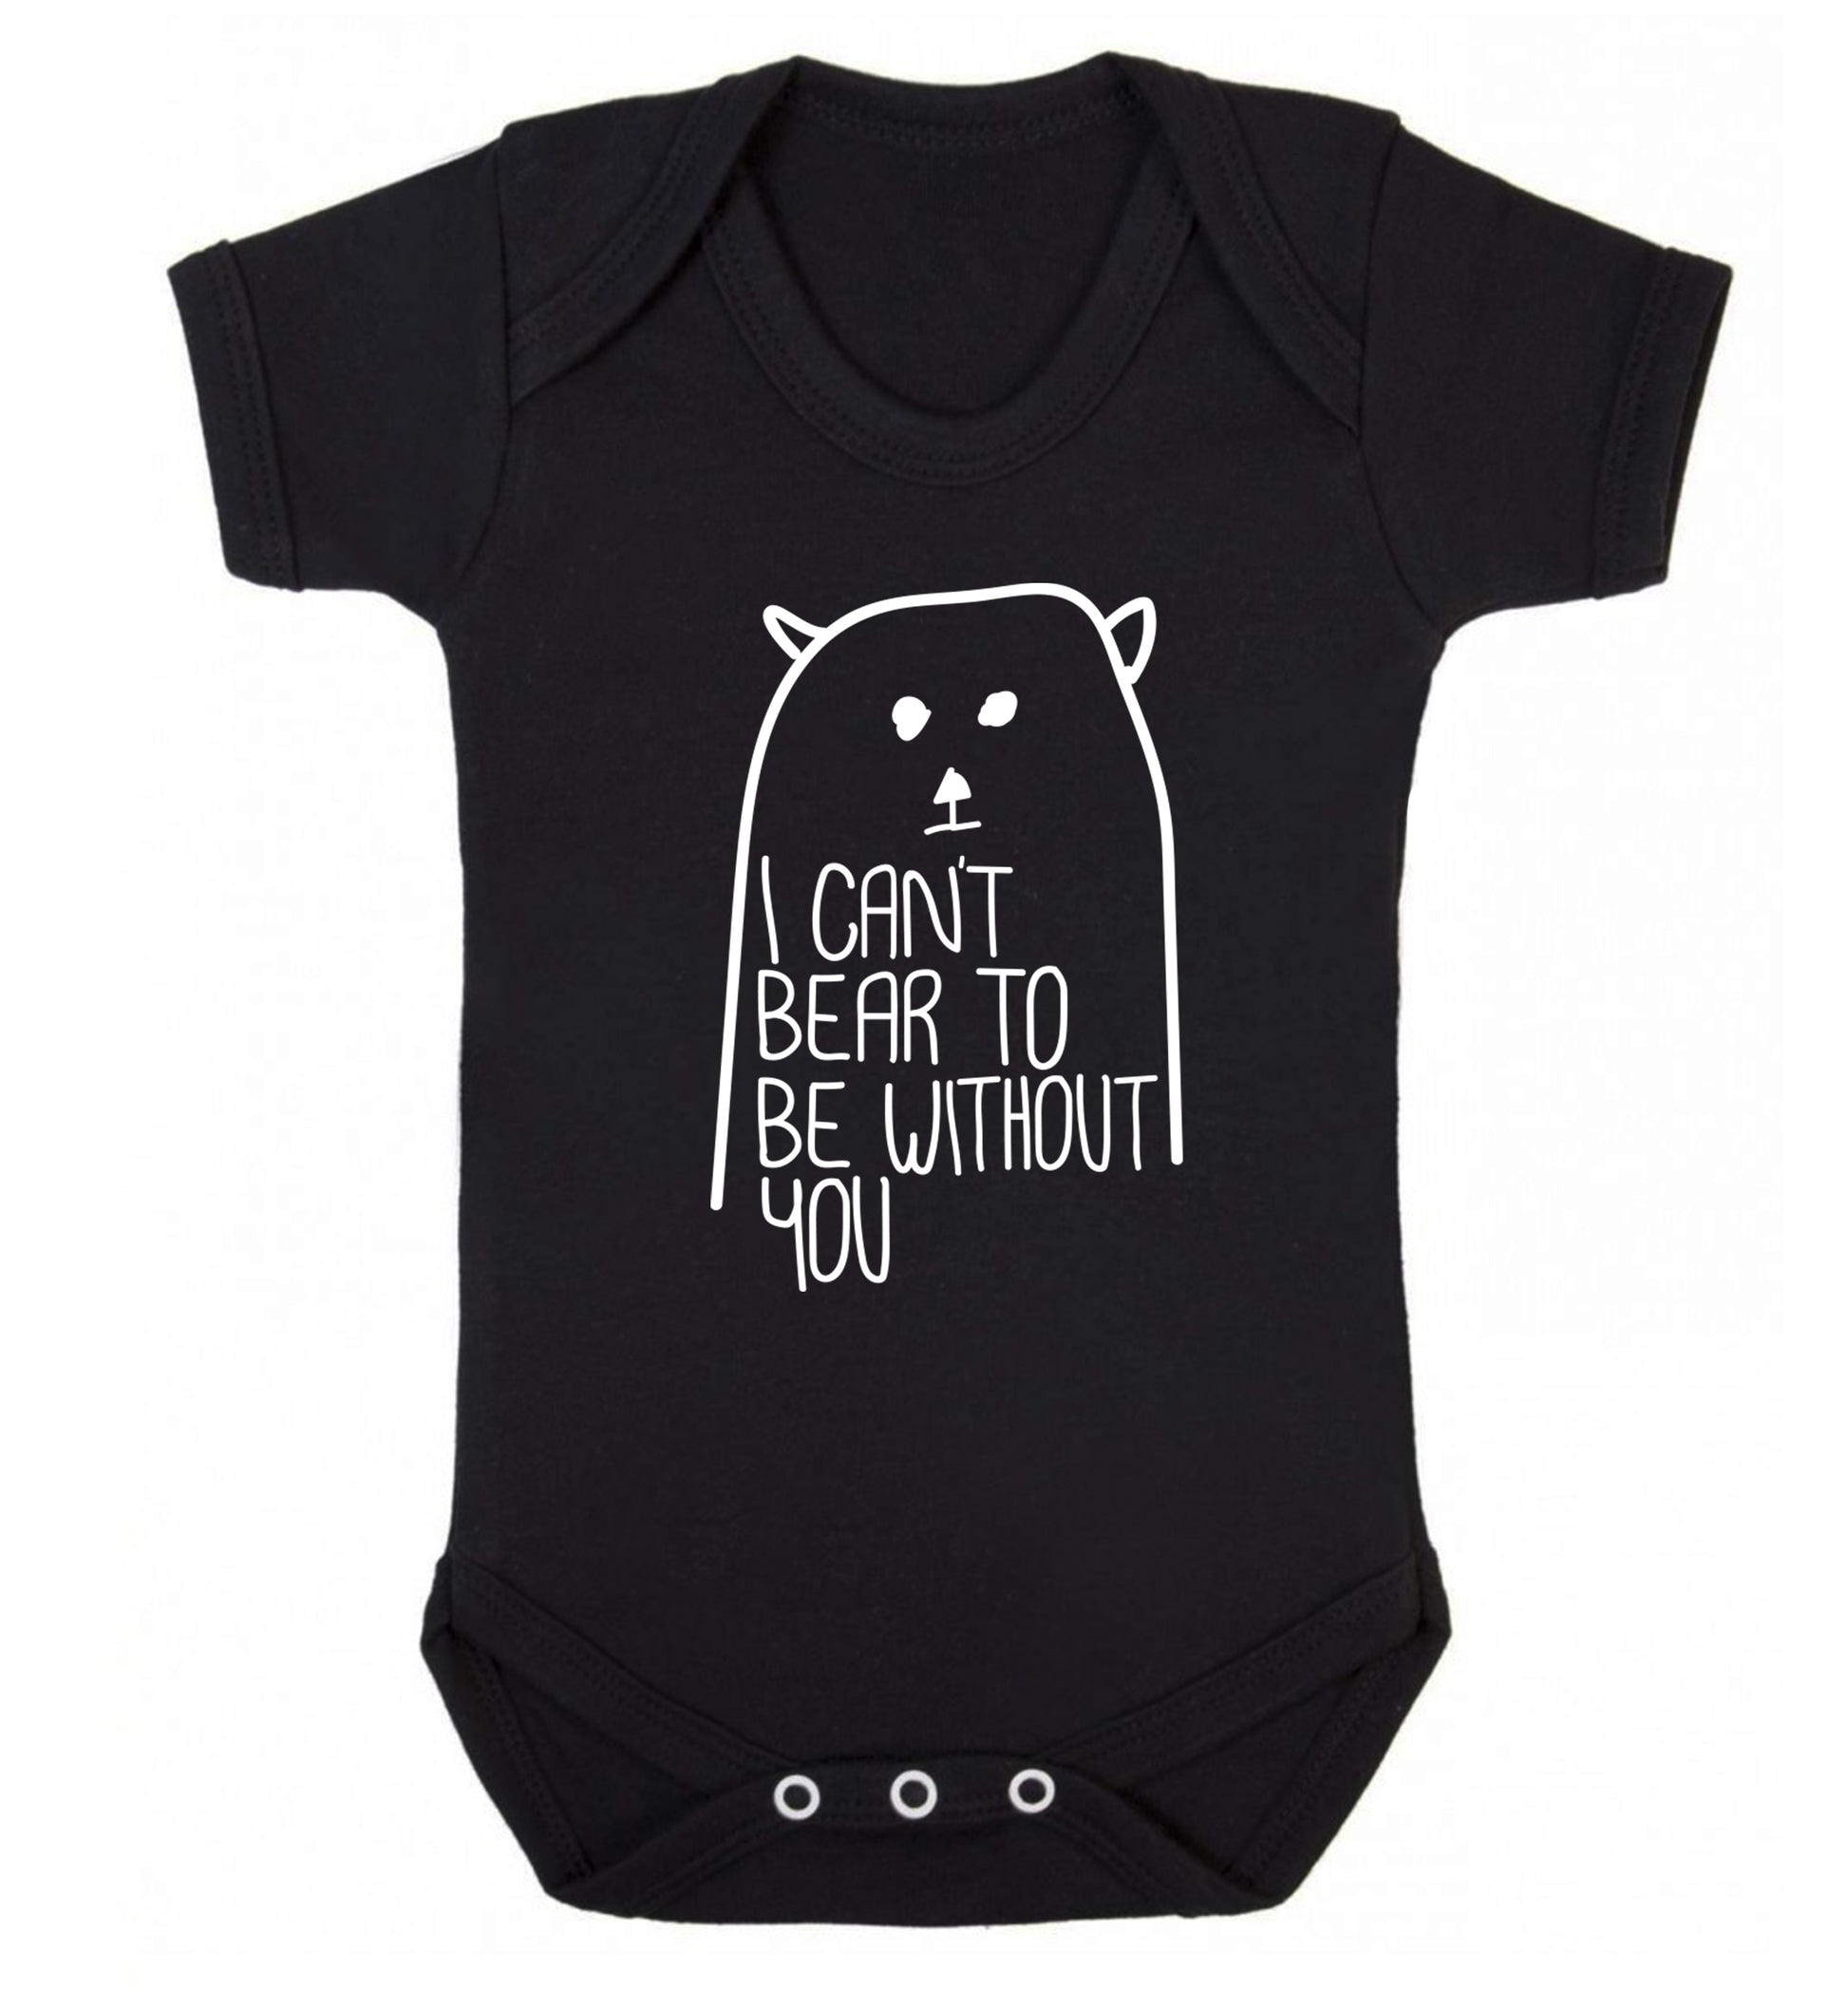 I can't bear to be without you Baby Vest black 18-24 months